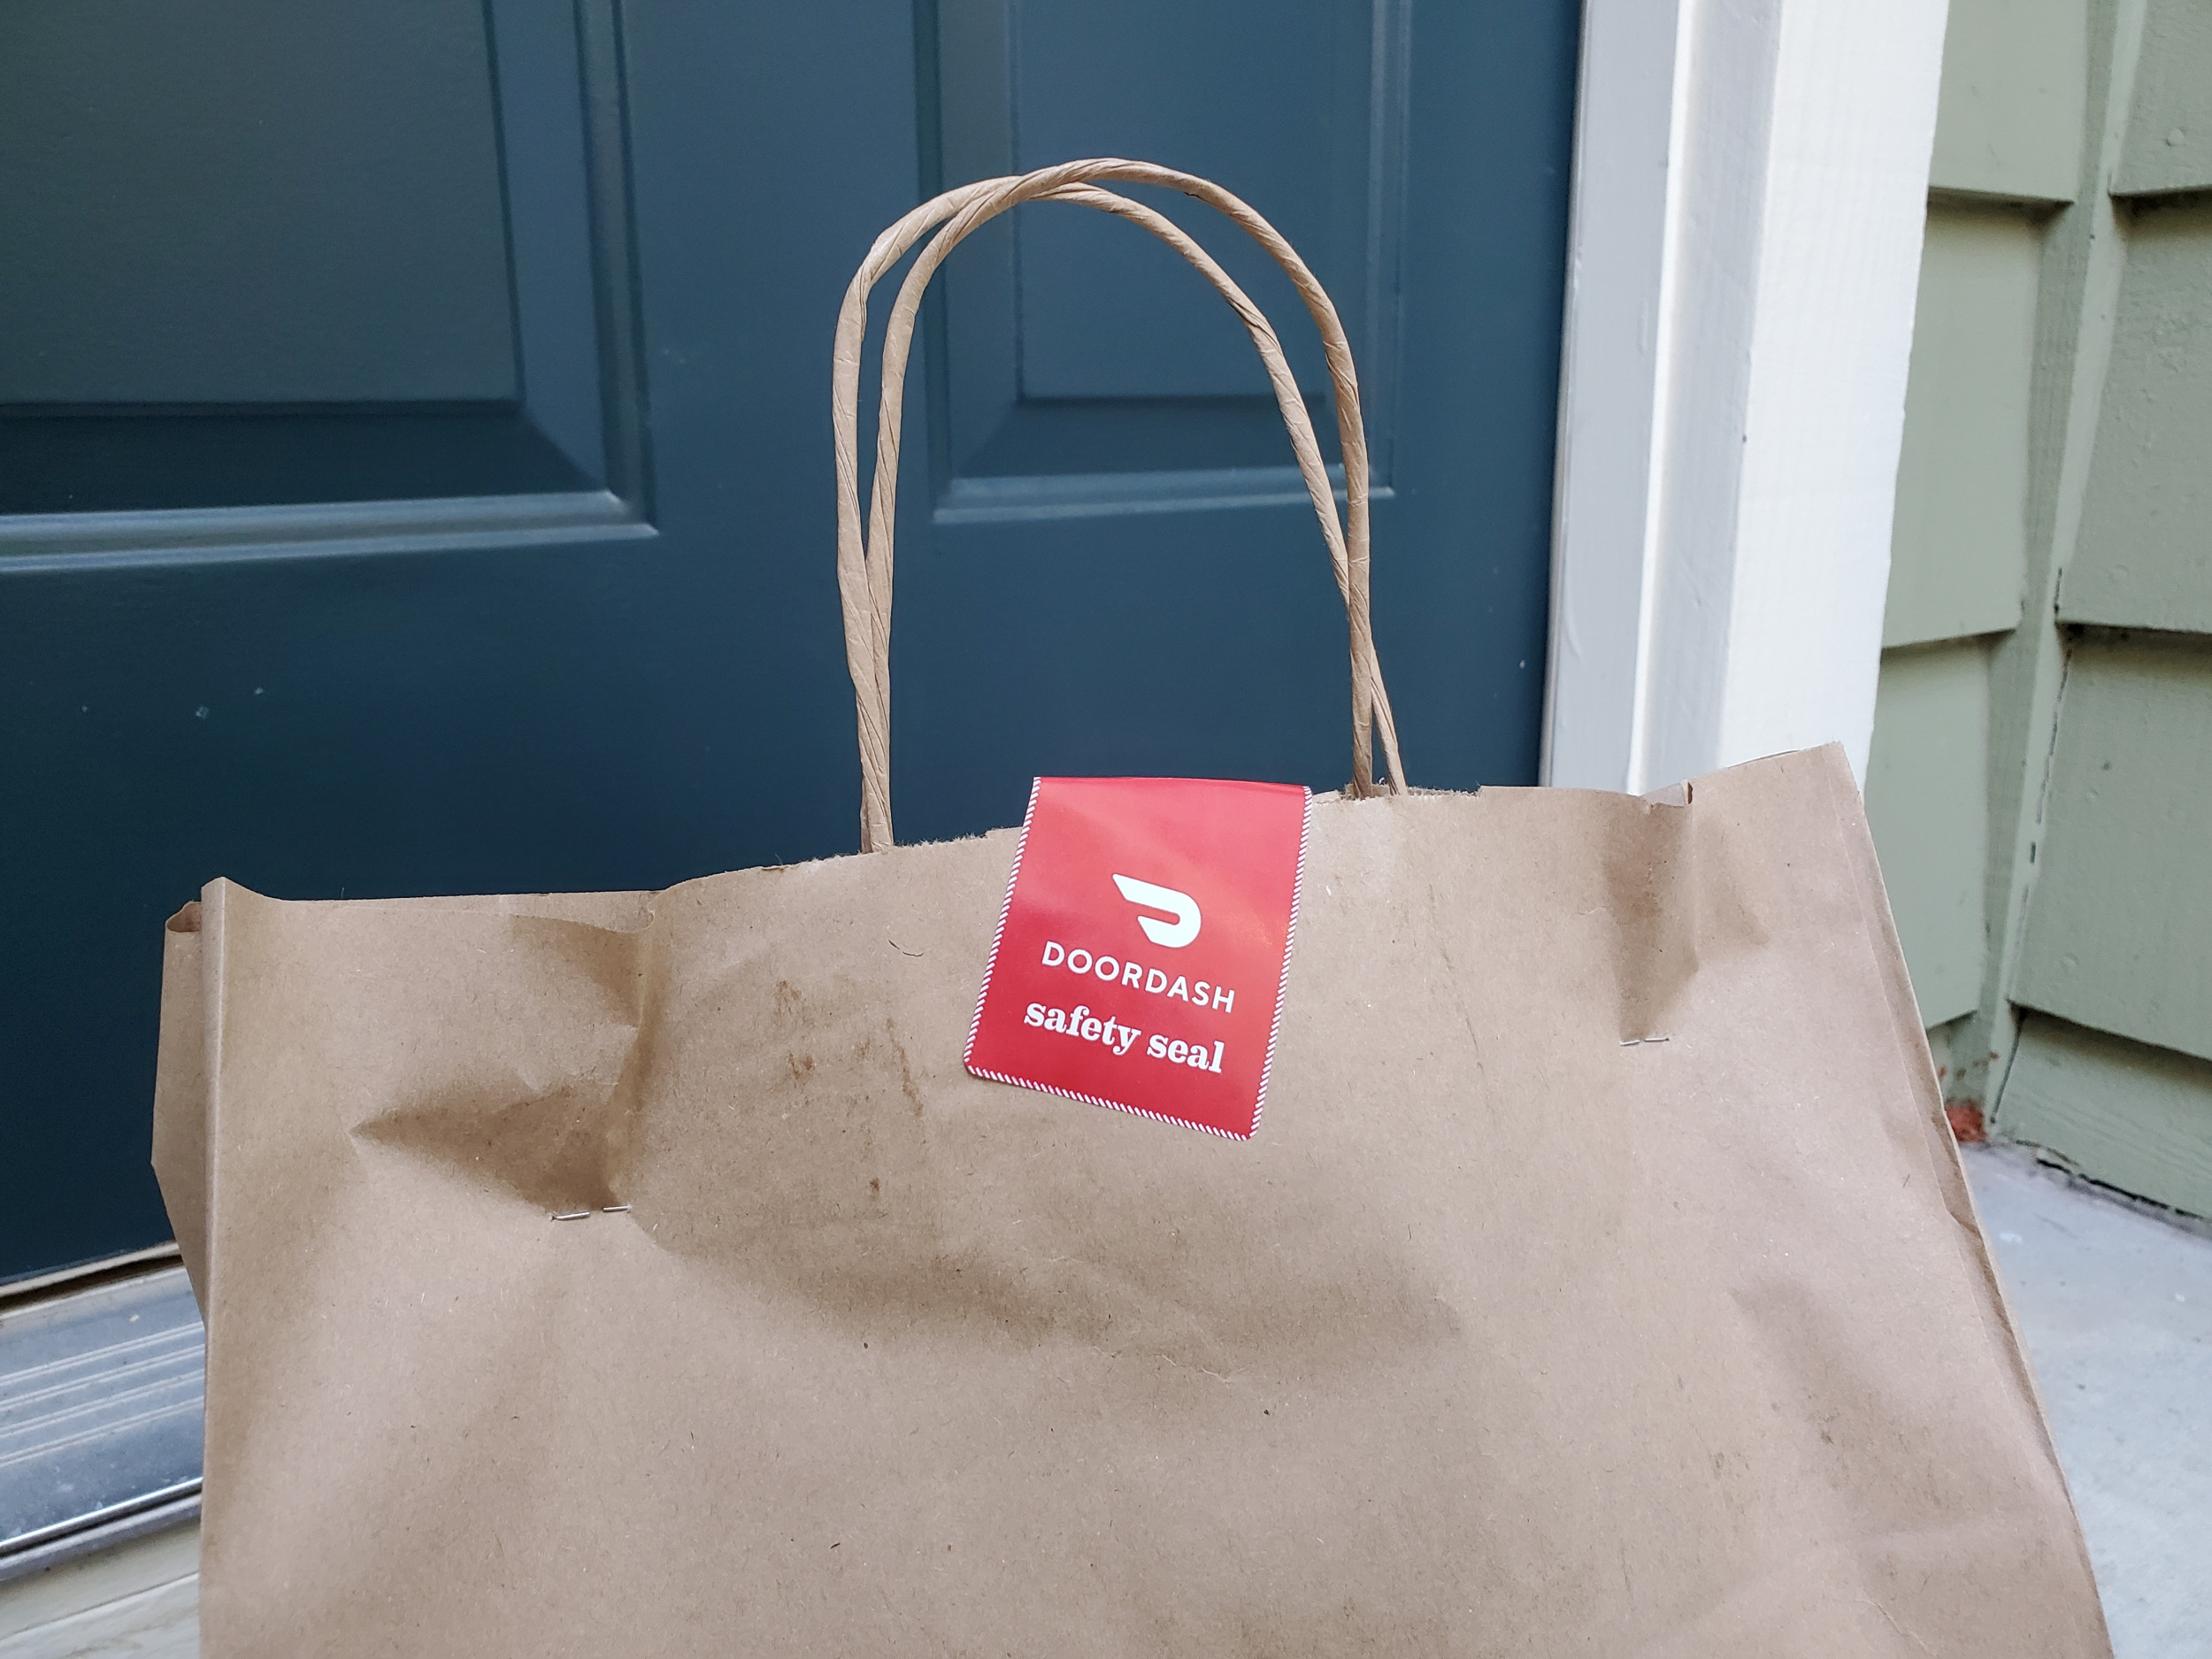 Teen Praised for Repeatedly Taking DoorDash Mistakenly Sent to His House